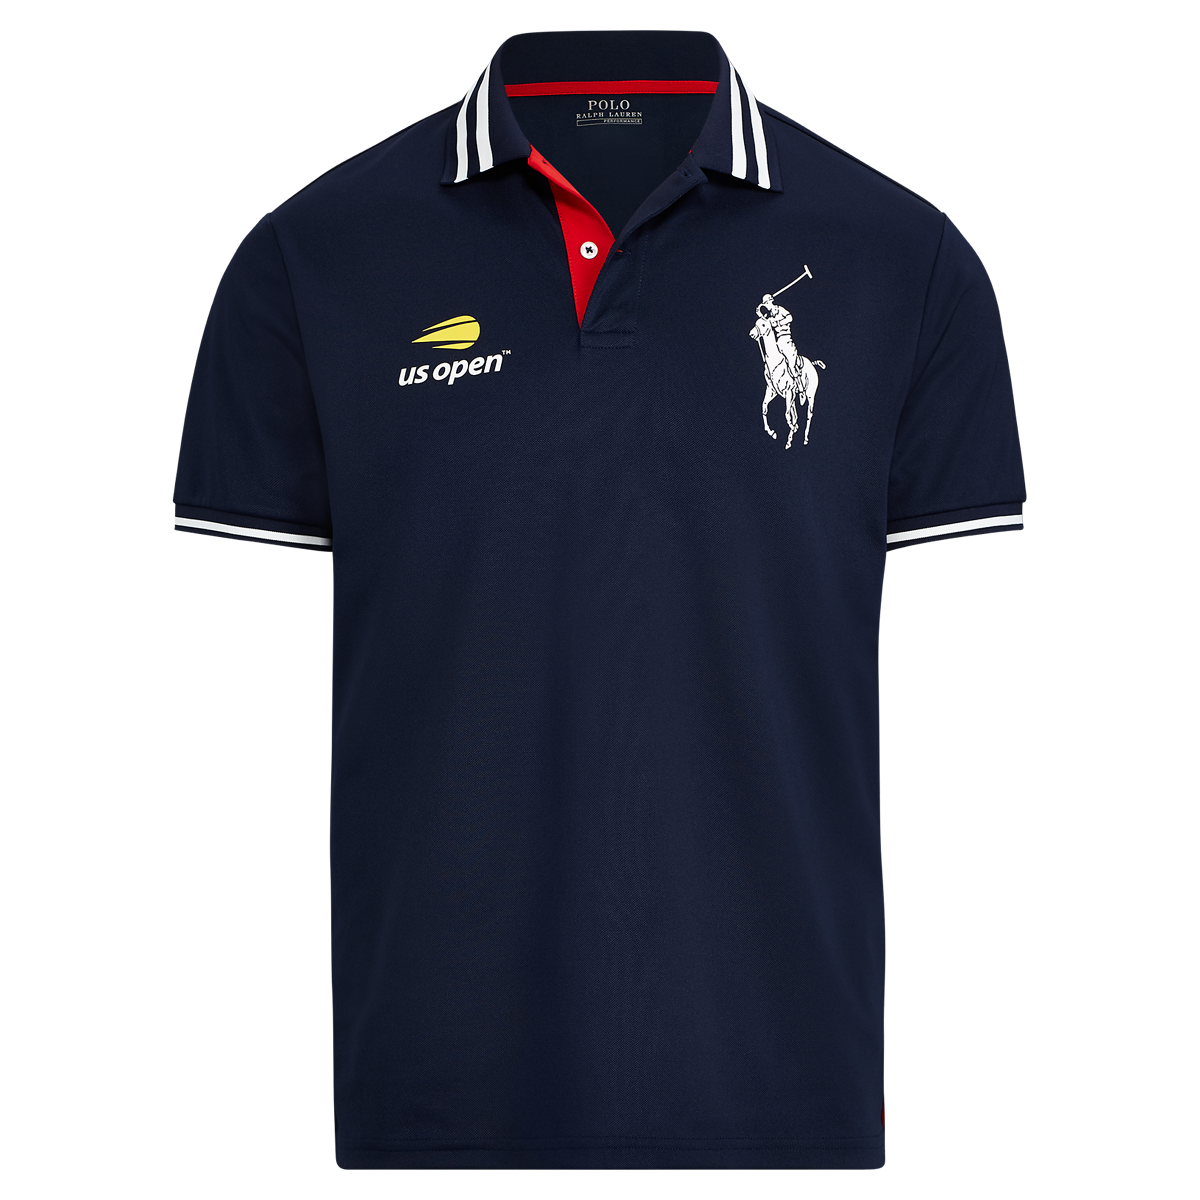 The new season and collection Polo Ralph Lauren.